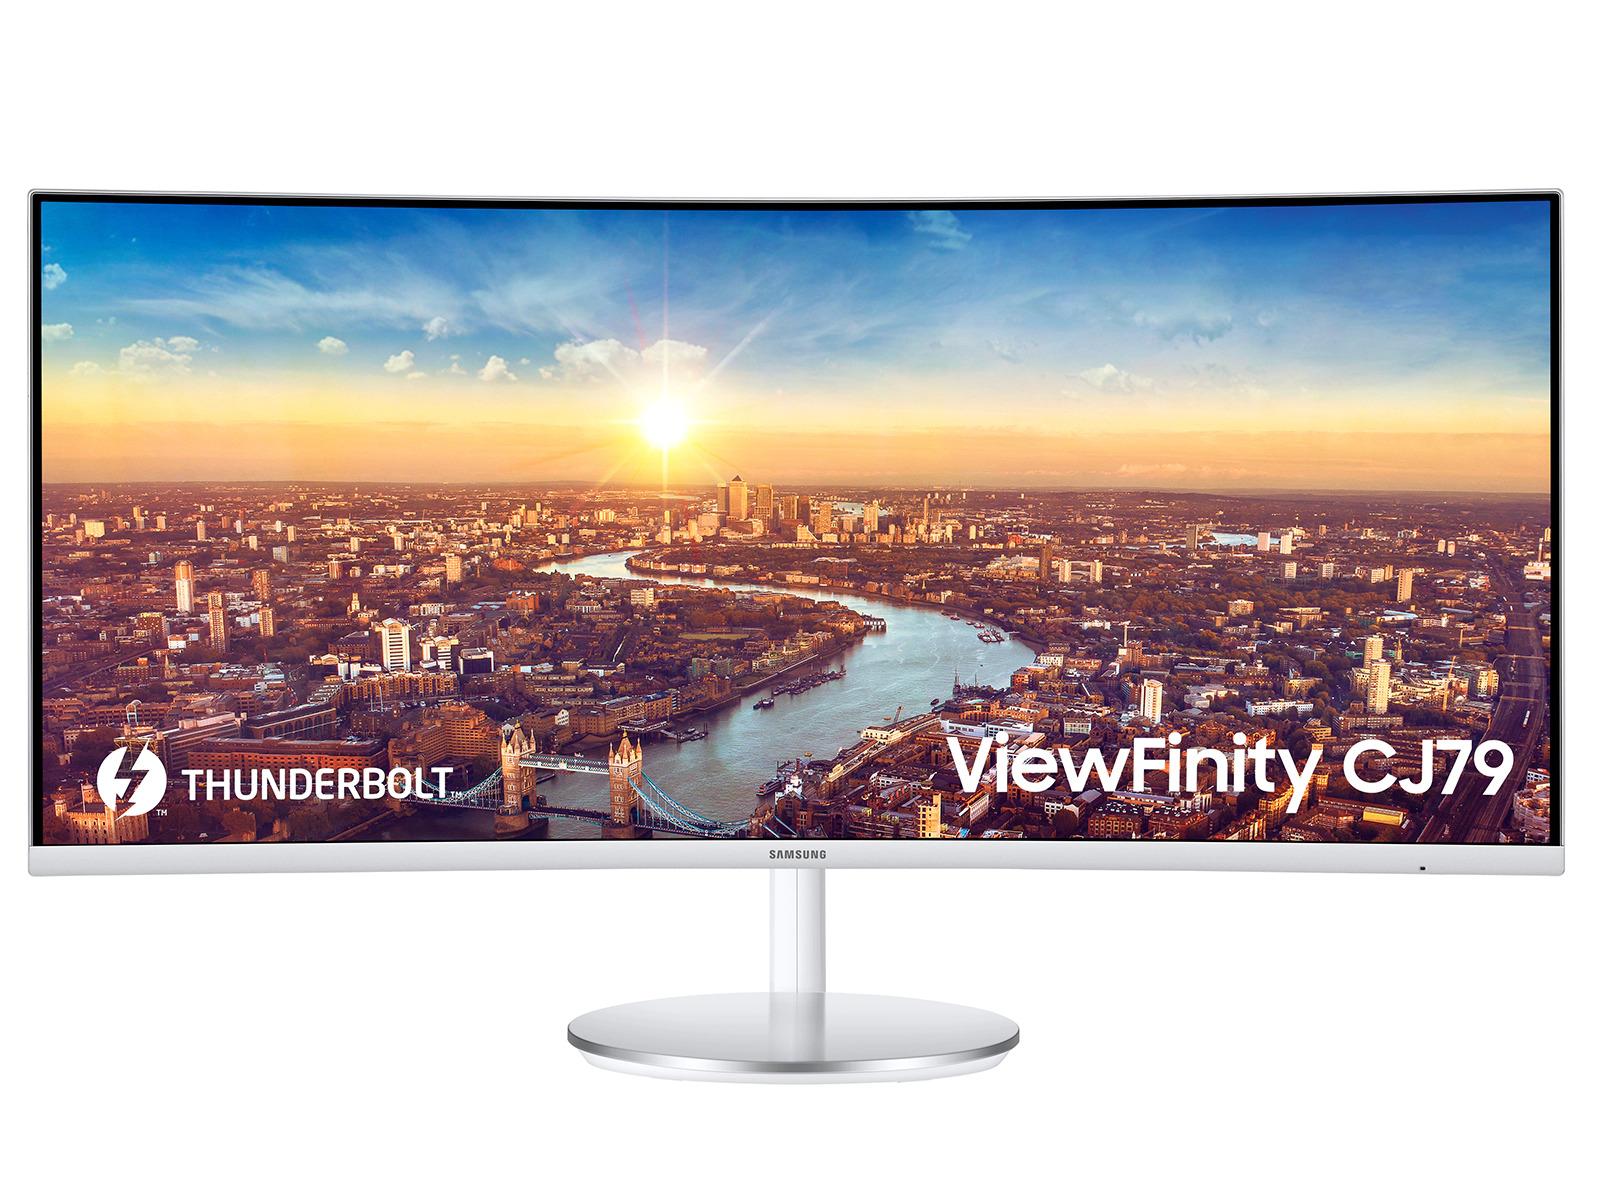 34in Samsung ViewFinity CJ79 WQHD QLED Ultra Wide Curved Monitor for $399.99 Shipped